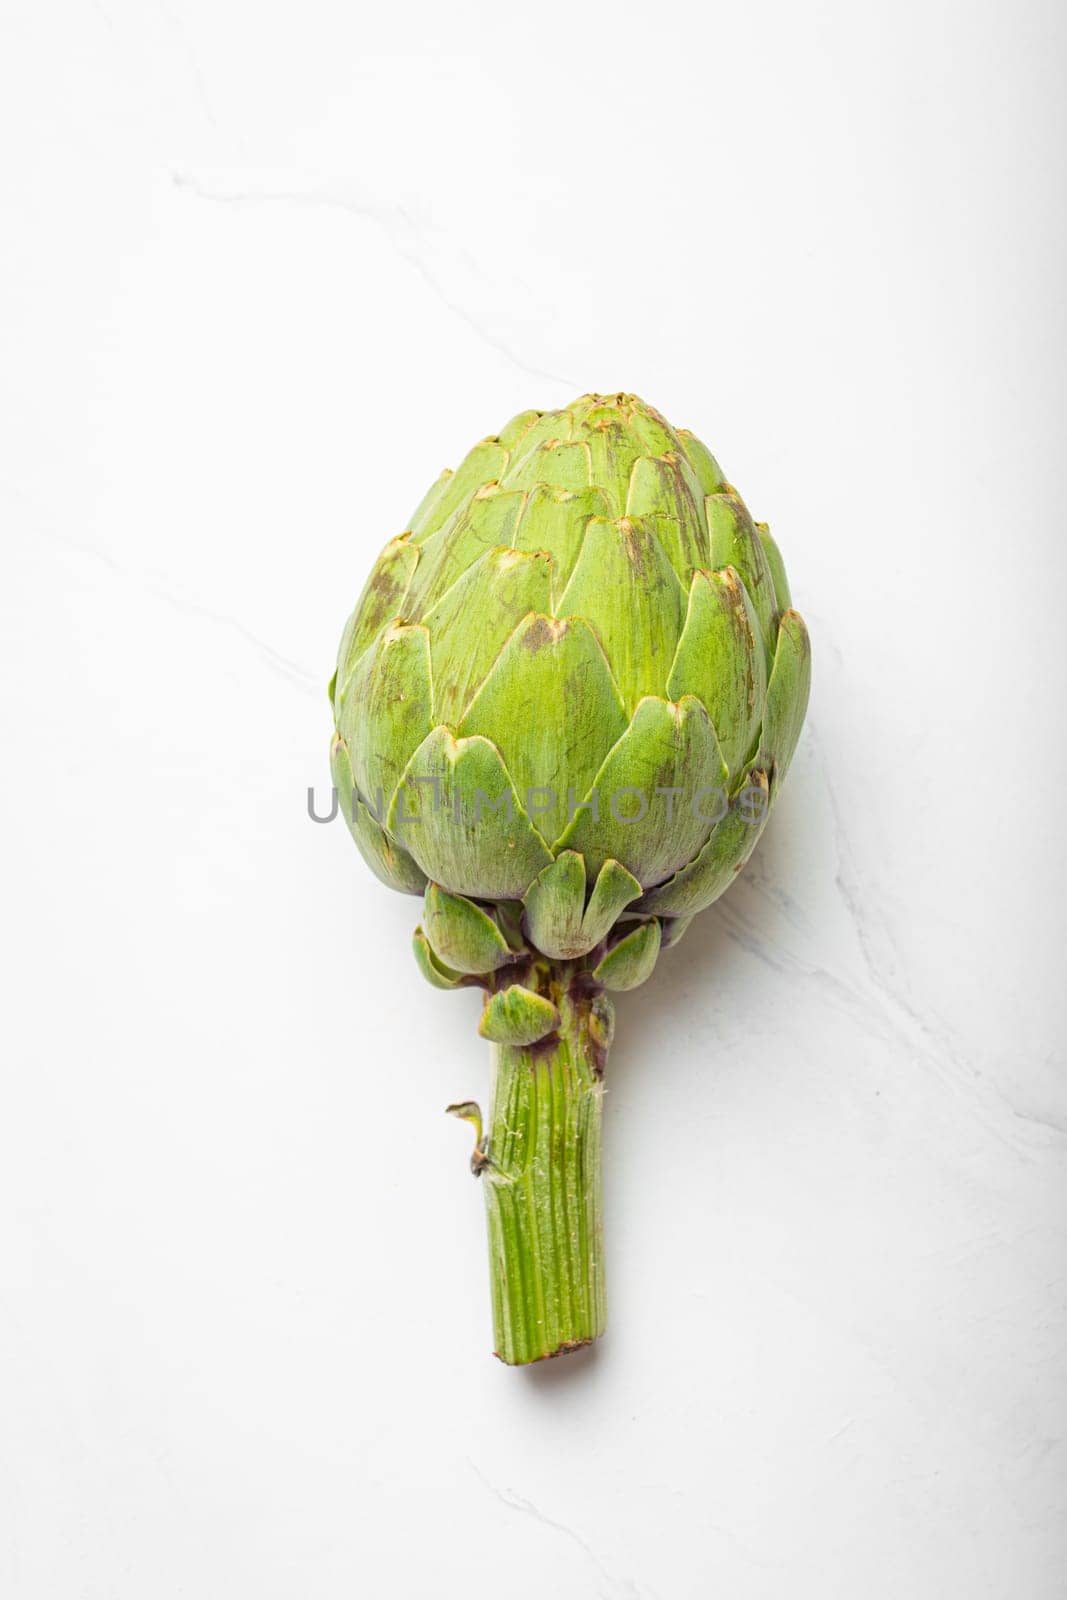 Fresh raw organic farm one artichoke on white marble background top view, healthy artichokes in balanced nutrition, cooking concept by its_al_dente